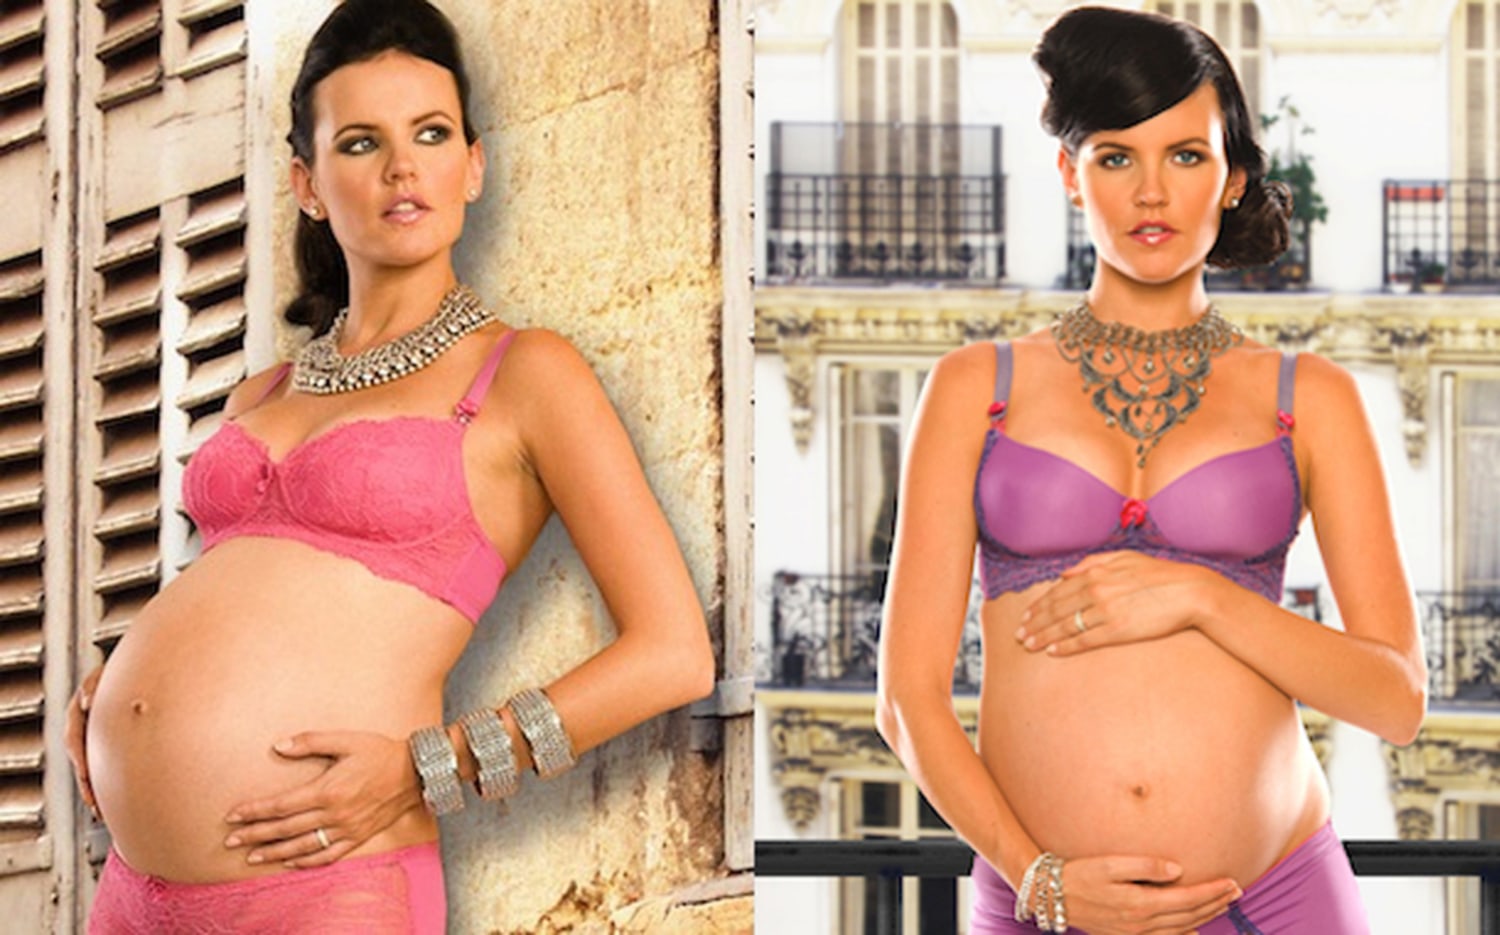 Maternity lingerie has come a long way in recent years